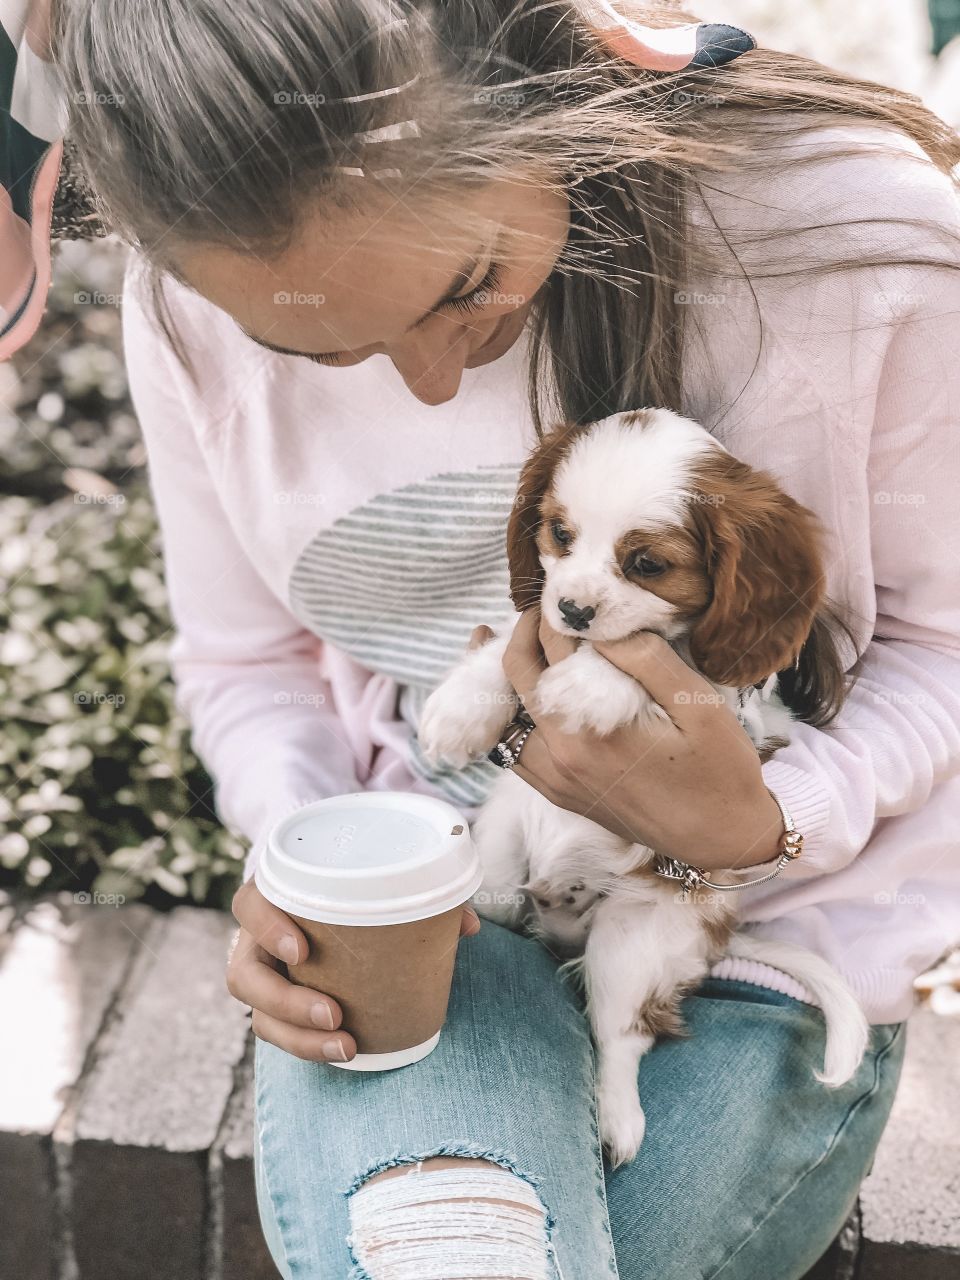 Coffee dates with only the cutest puppies